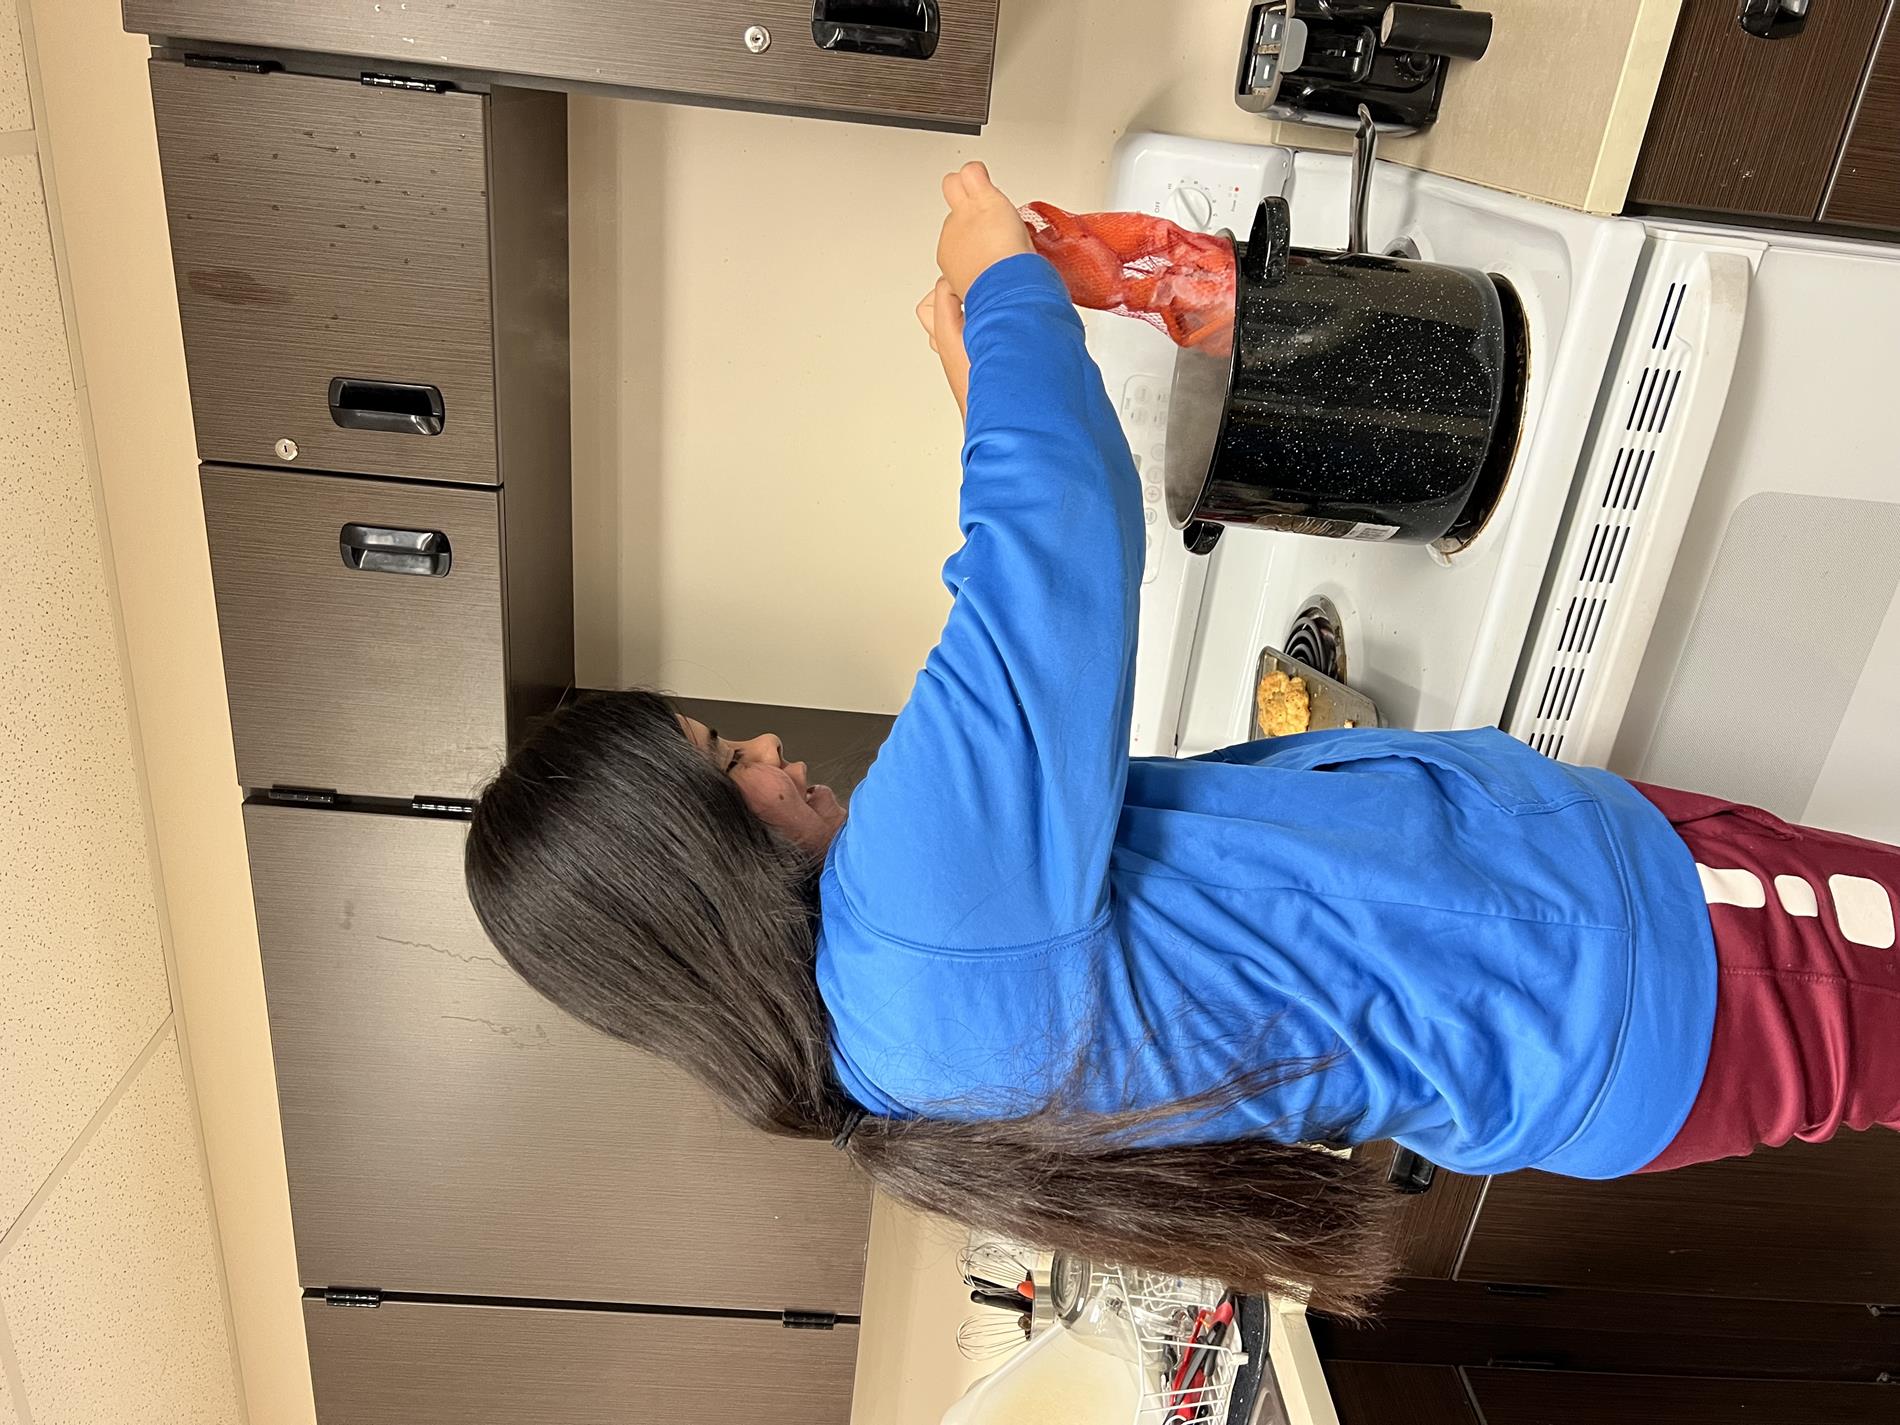 A student boils a lobster.